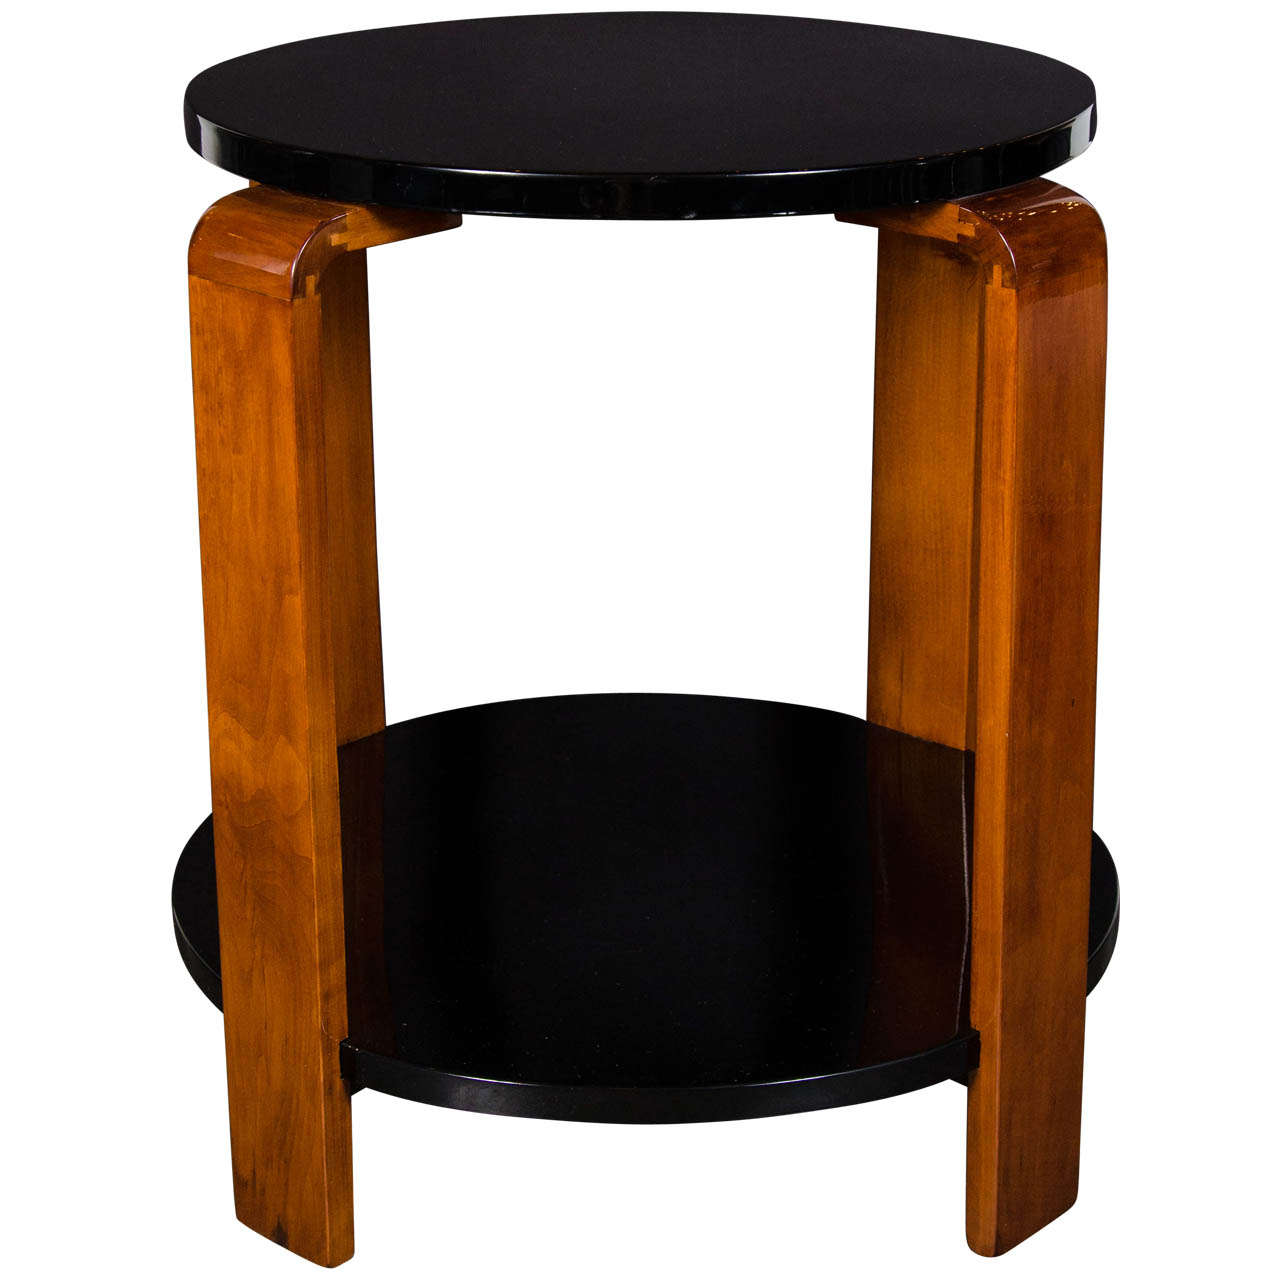 Art Deco Streamline Two-Tier Occasional Table in Black Lacquer and Walnut